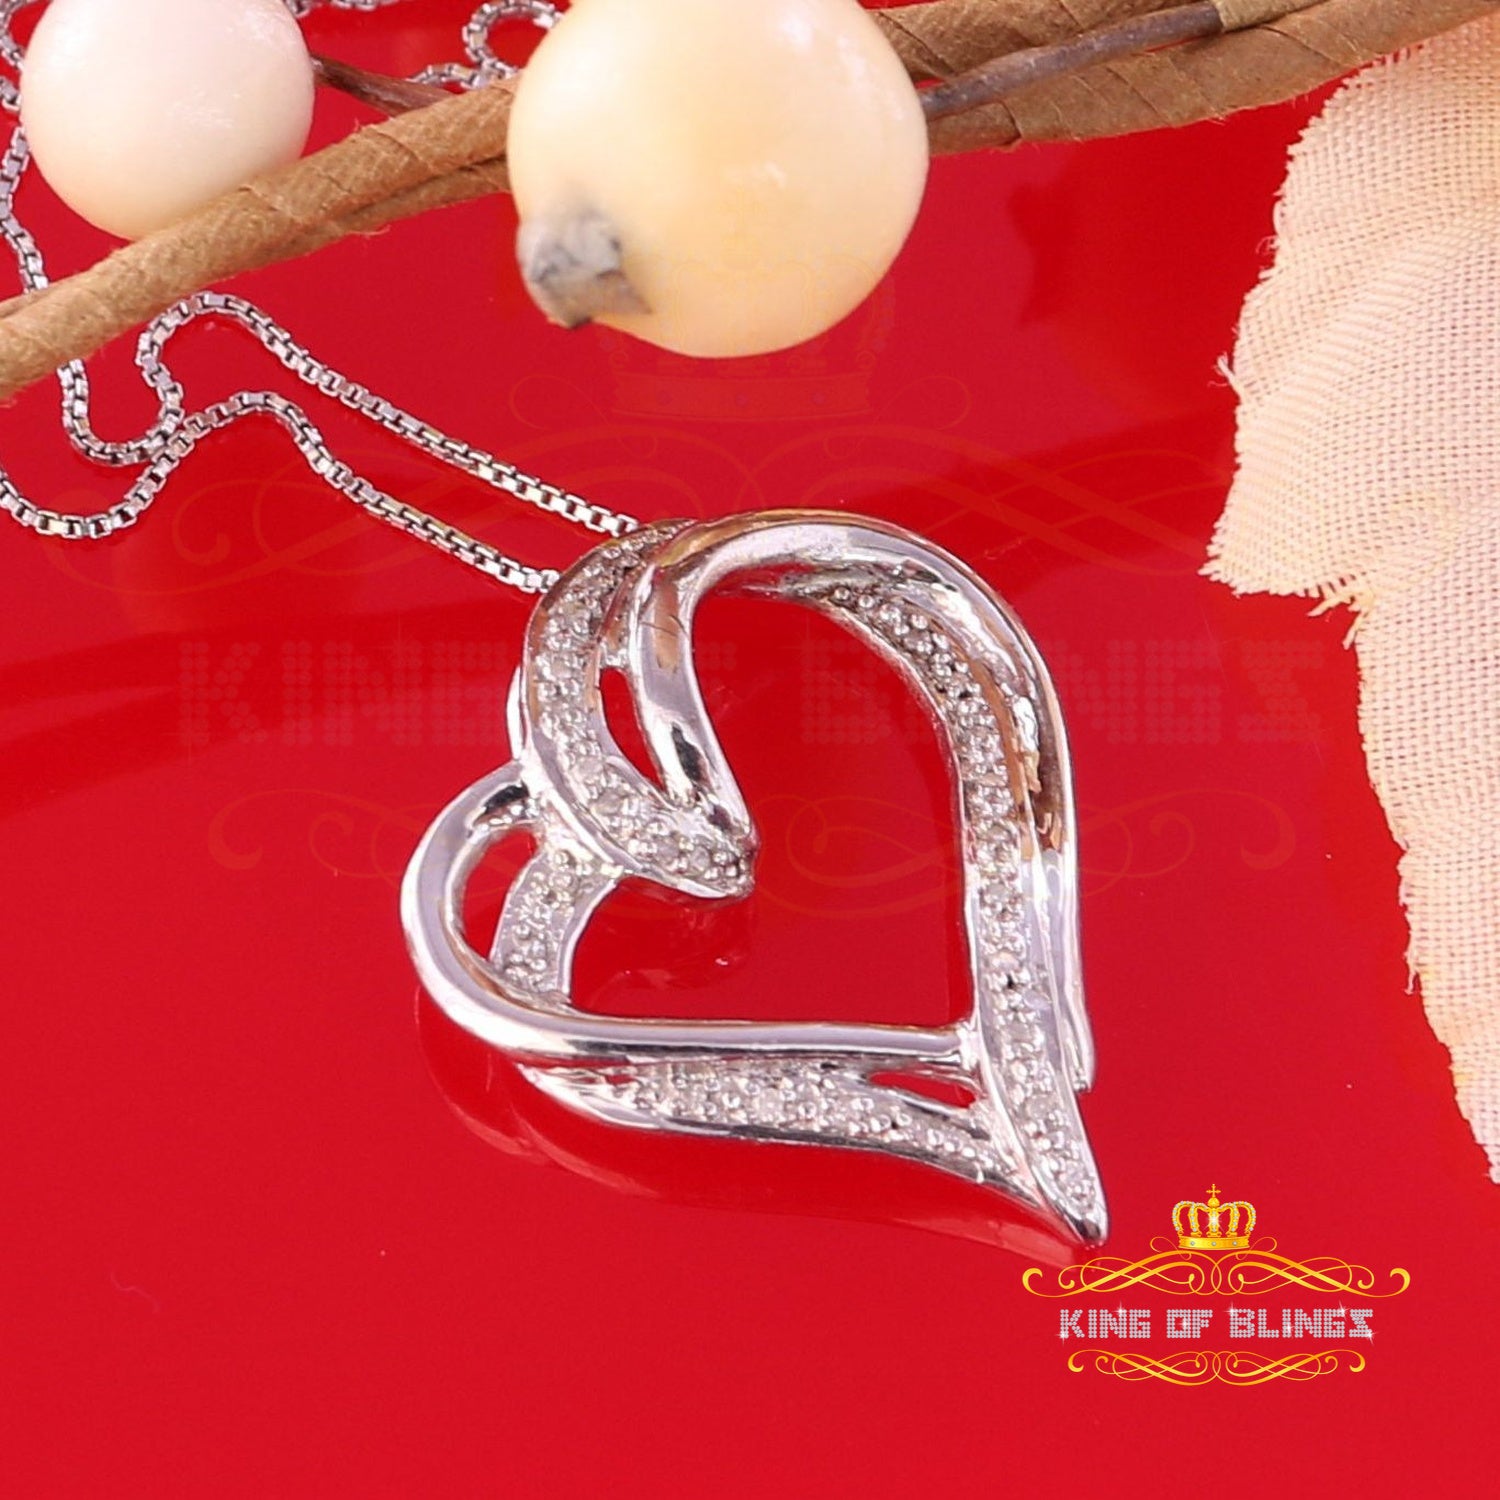 King Of Bling's Real 0.10CT Diamond HEART'S 925 Sterling Silver White Charm Necklace Pendant KING OF BLINGS